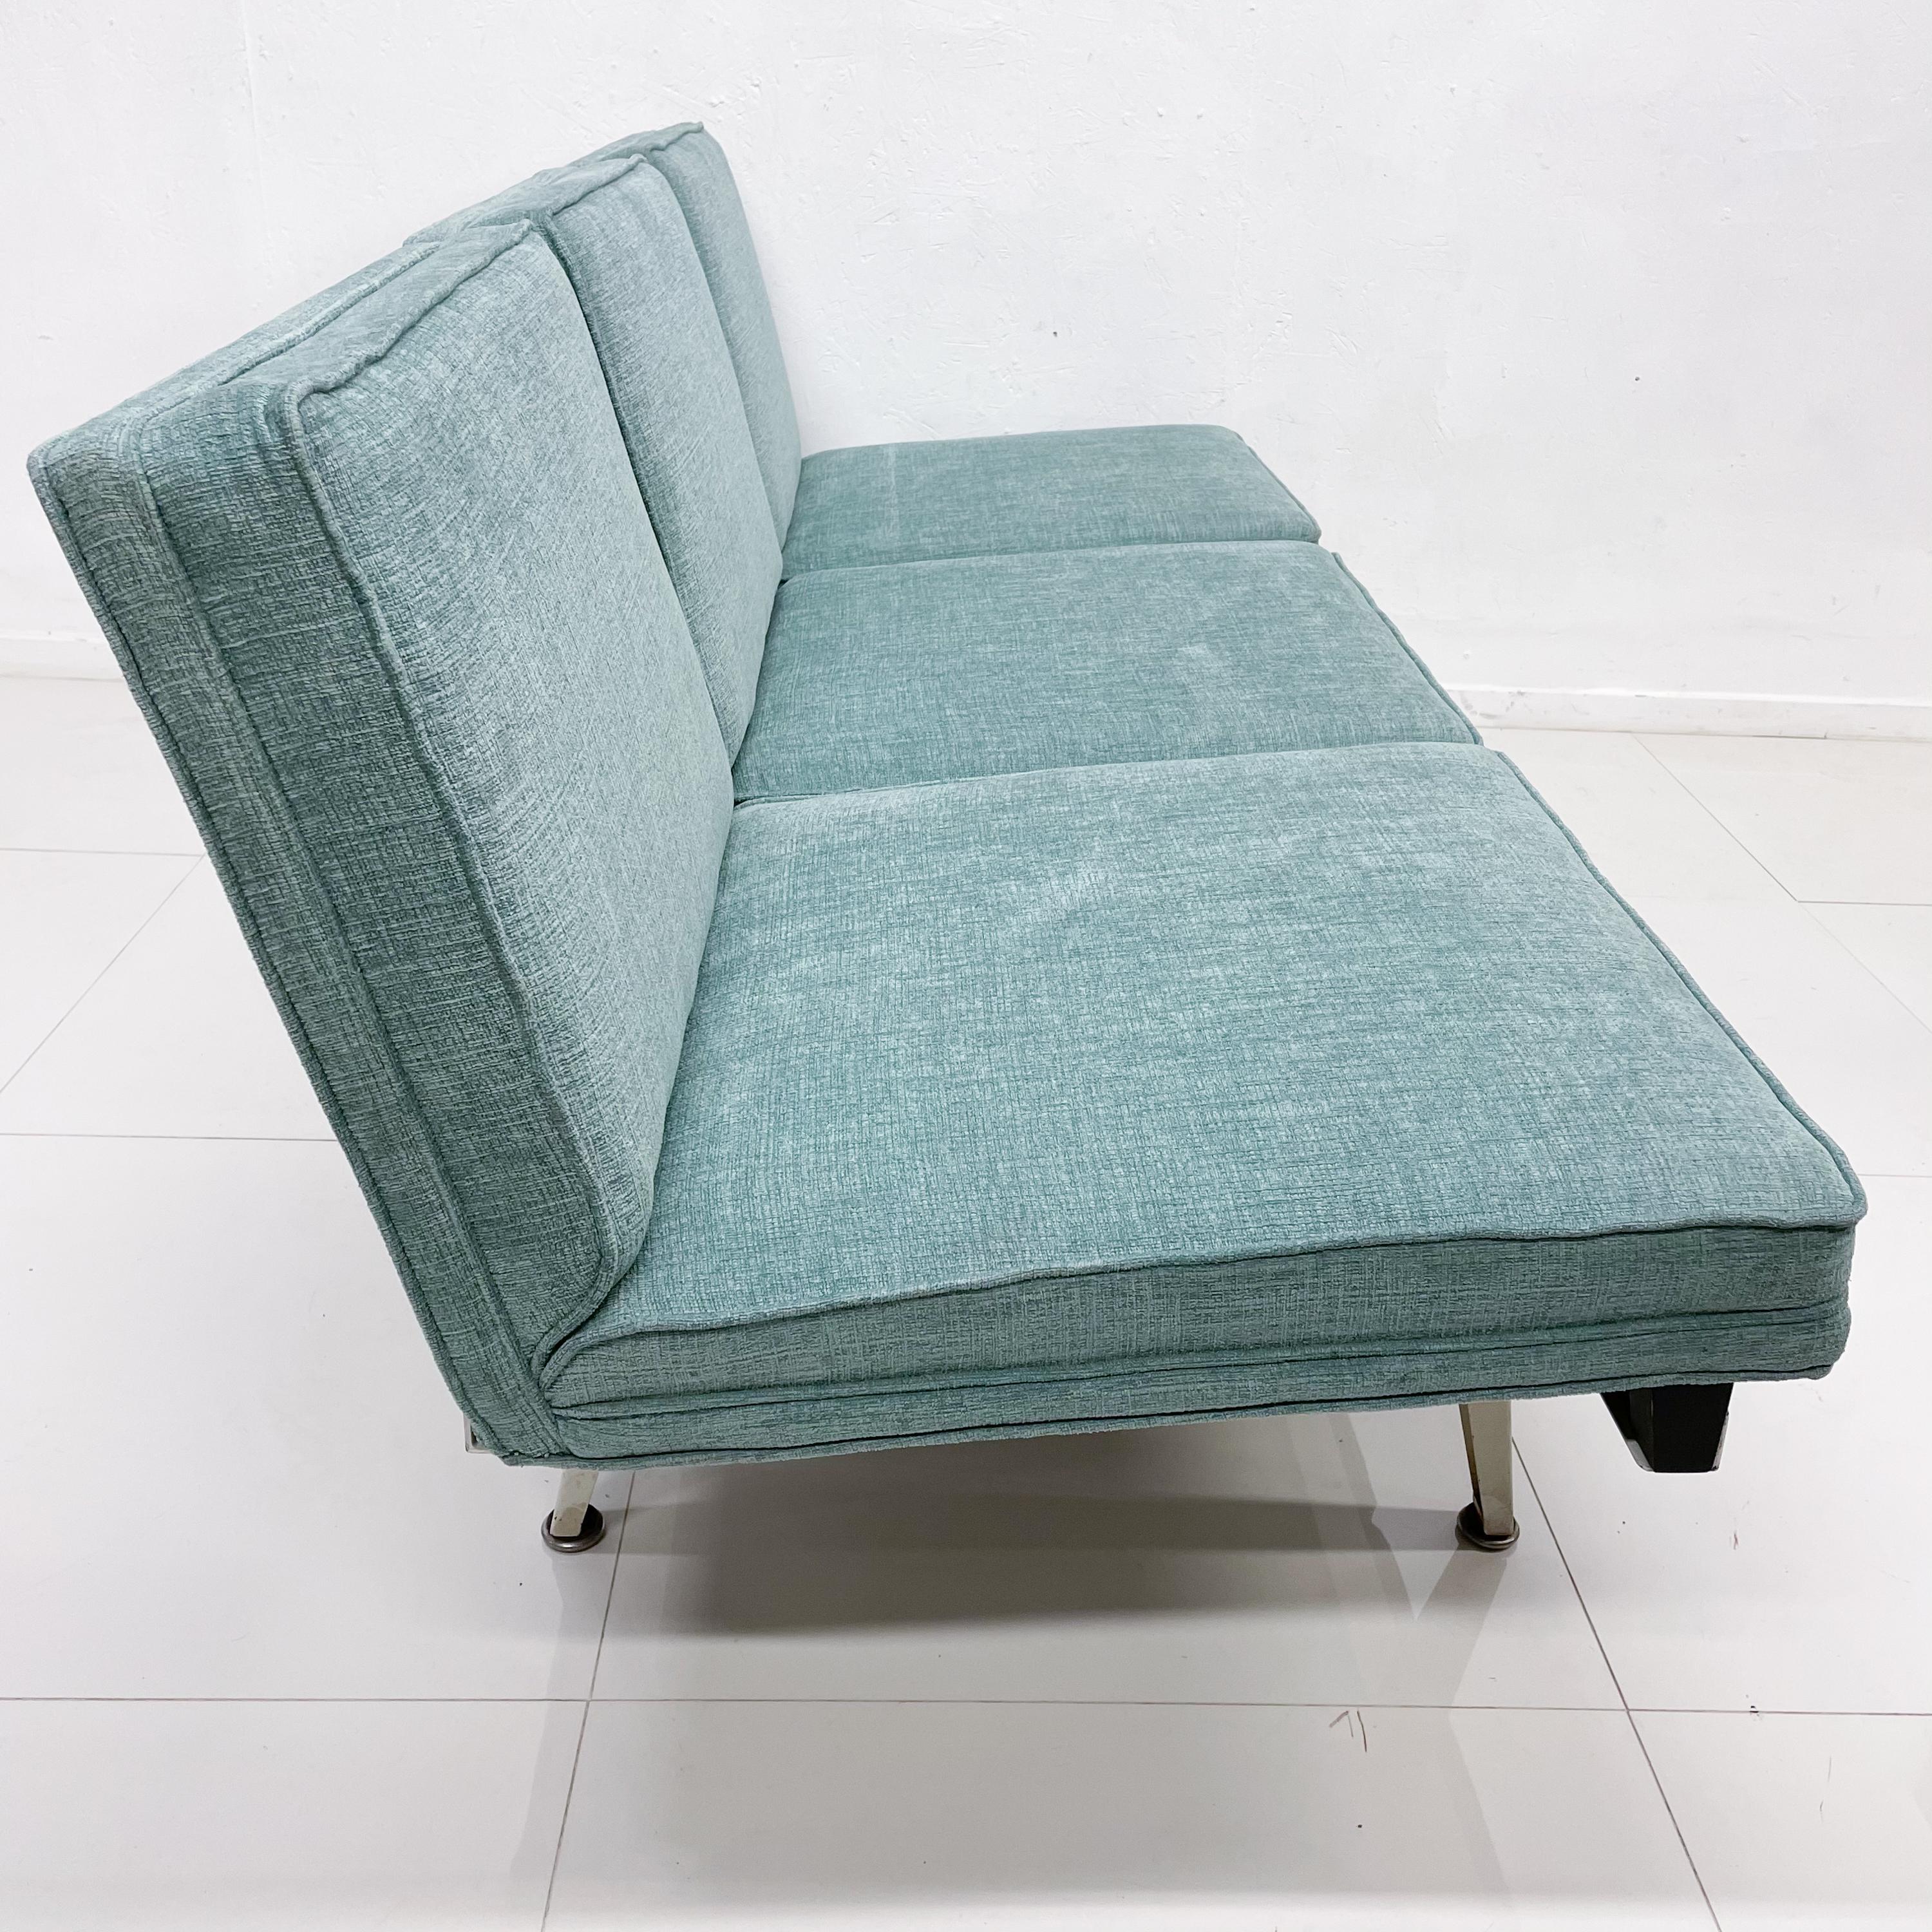 Mid-20th Century George Nelson Modern Sofa for Herman Miller in Ethereal Mint Green 1950s USA